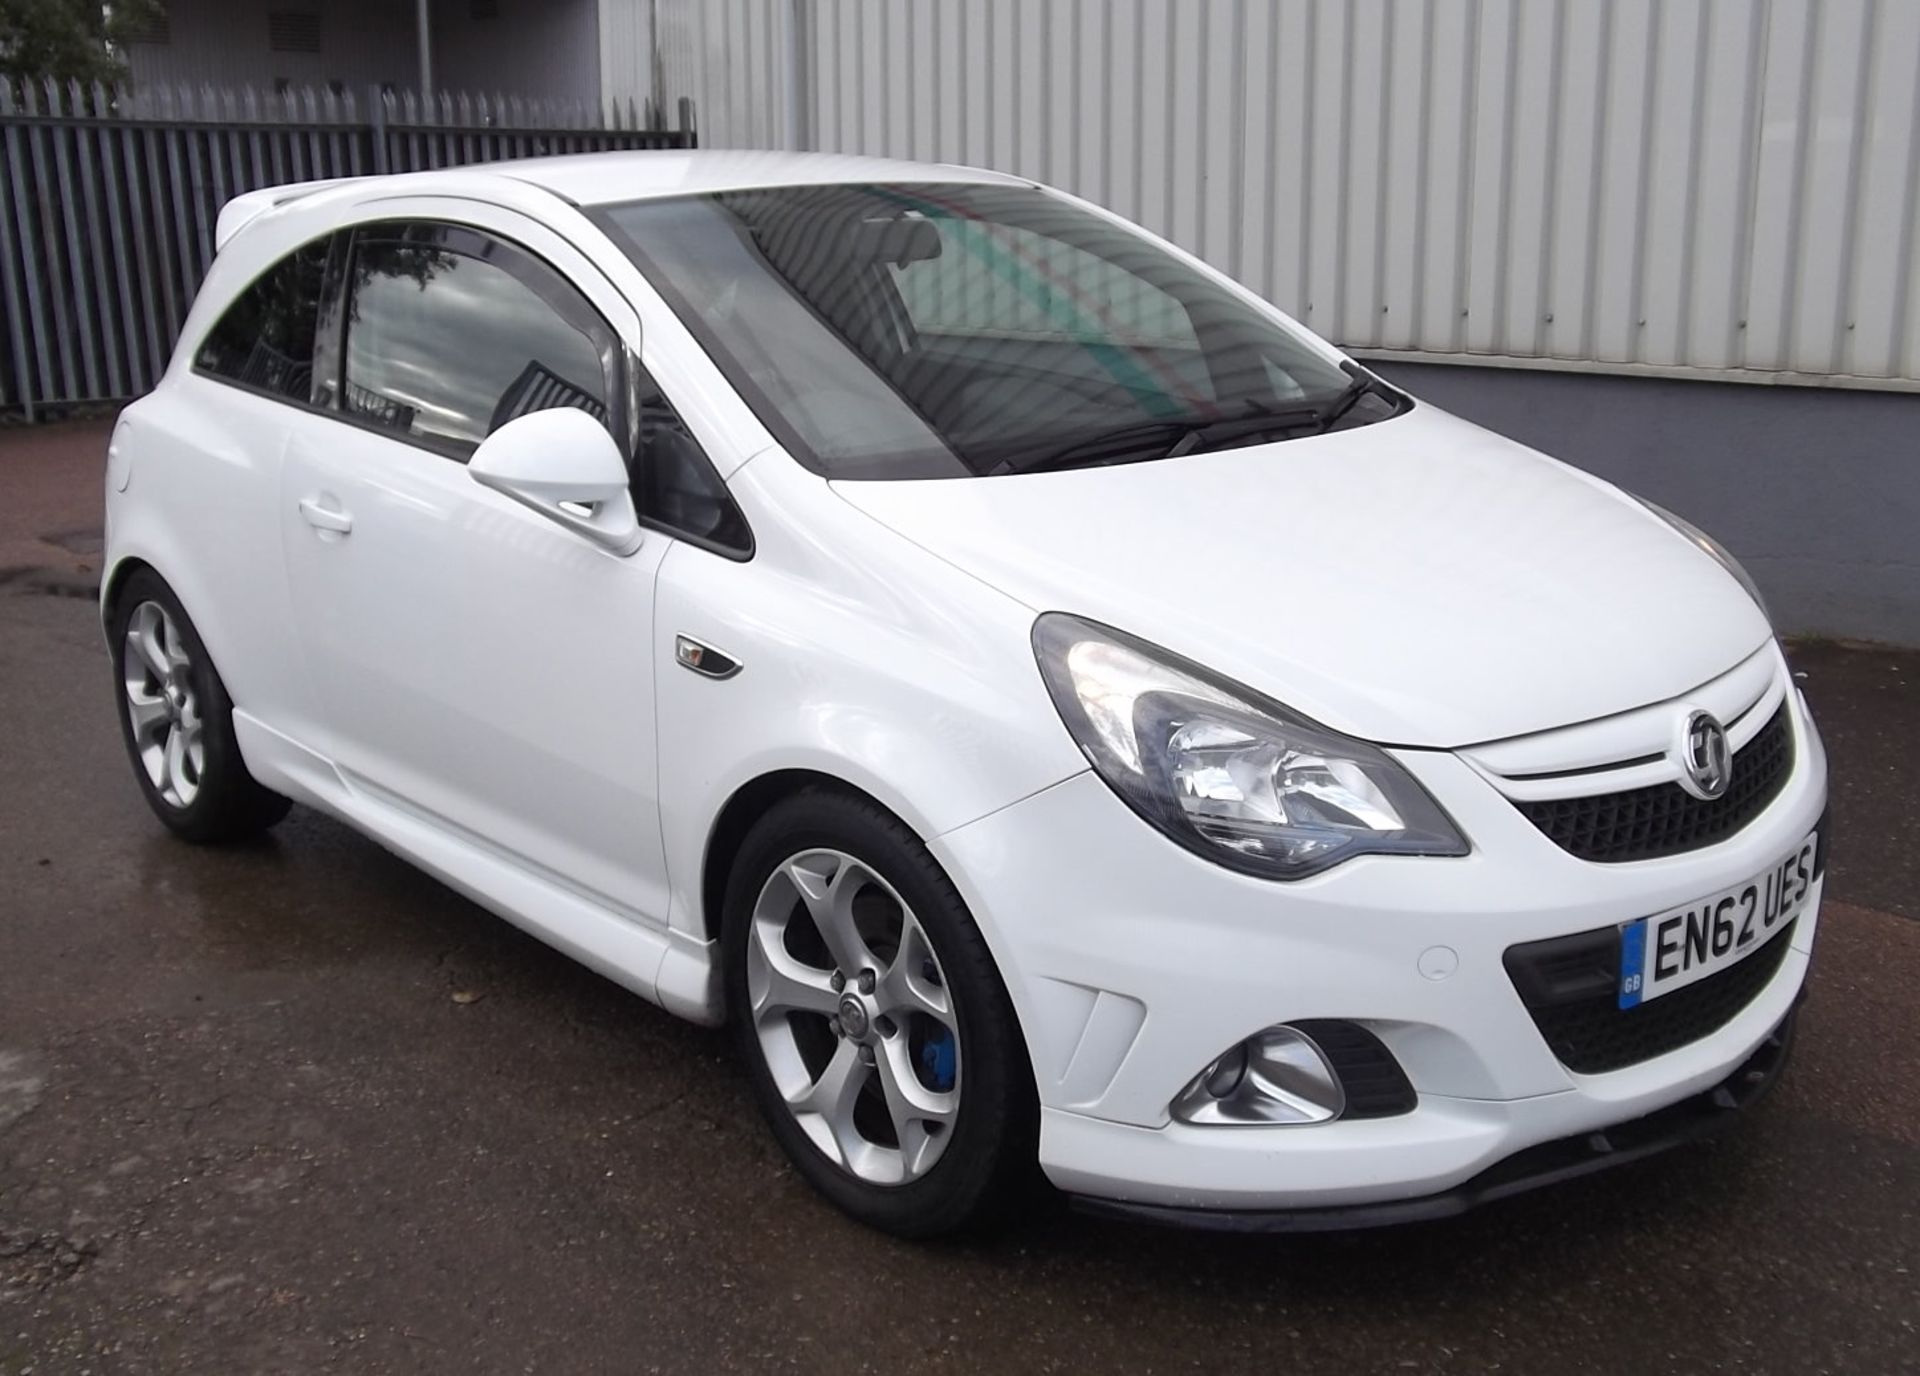 2012 Vauxhall Corsa 1.6T VXR 3 Door Hatchback - CL505 - NO VAT ON THE HAMMER - Location: Corby, - Image 17 of 24